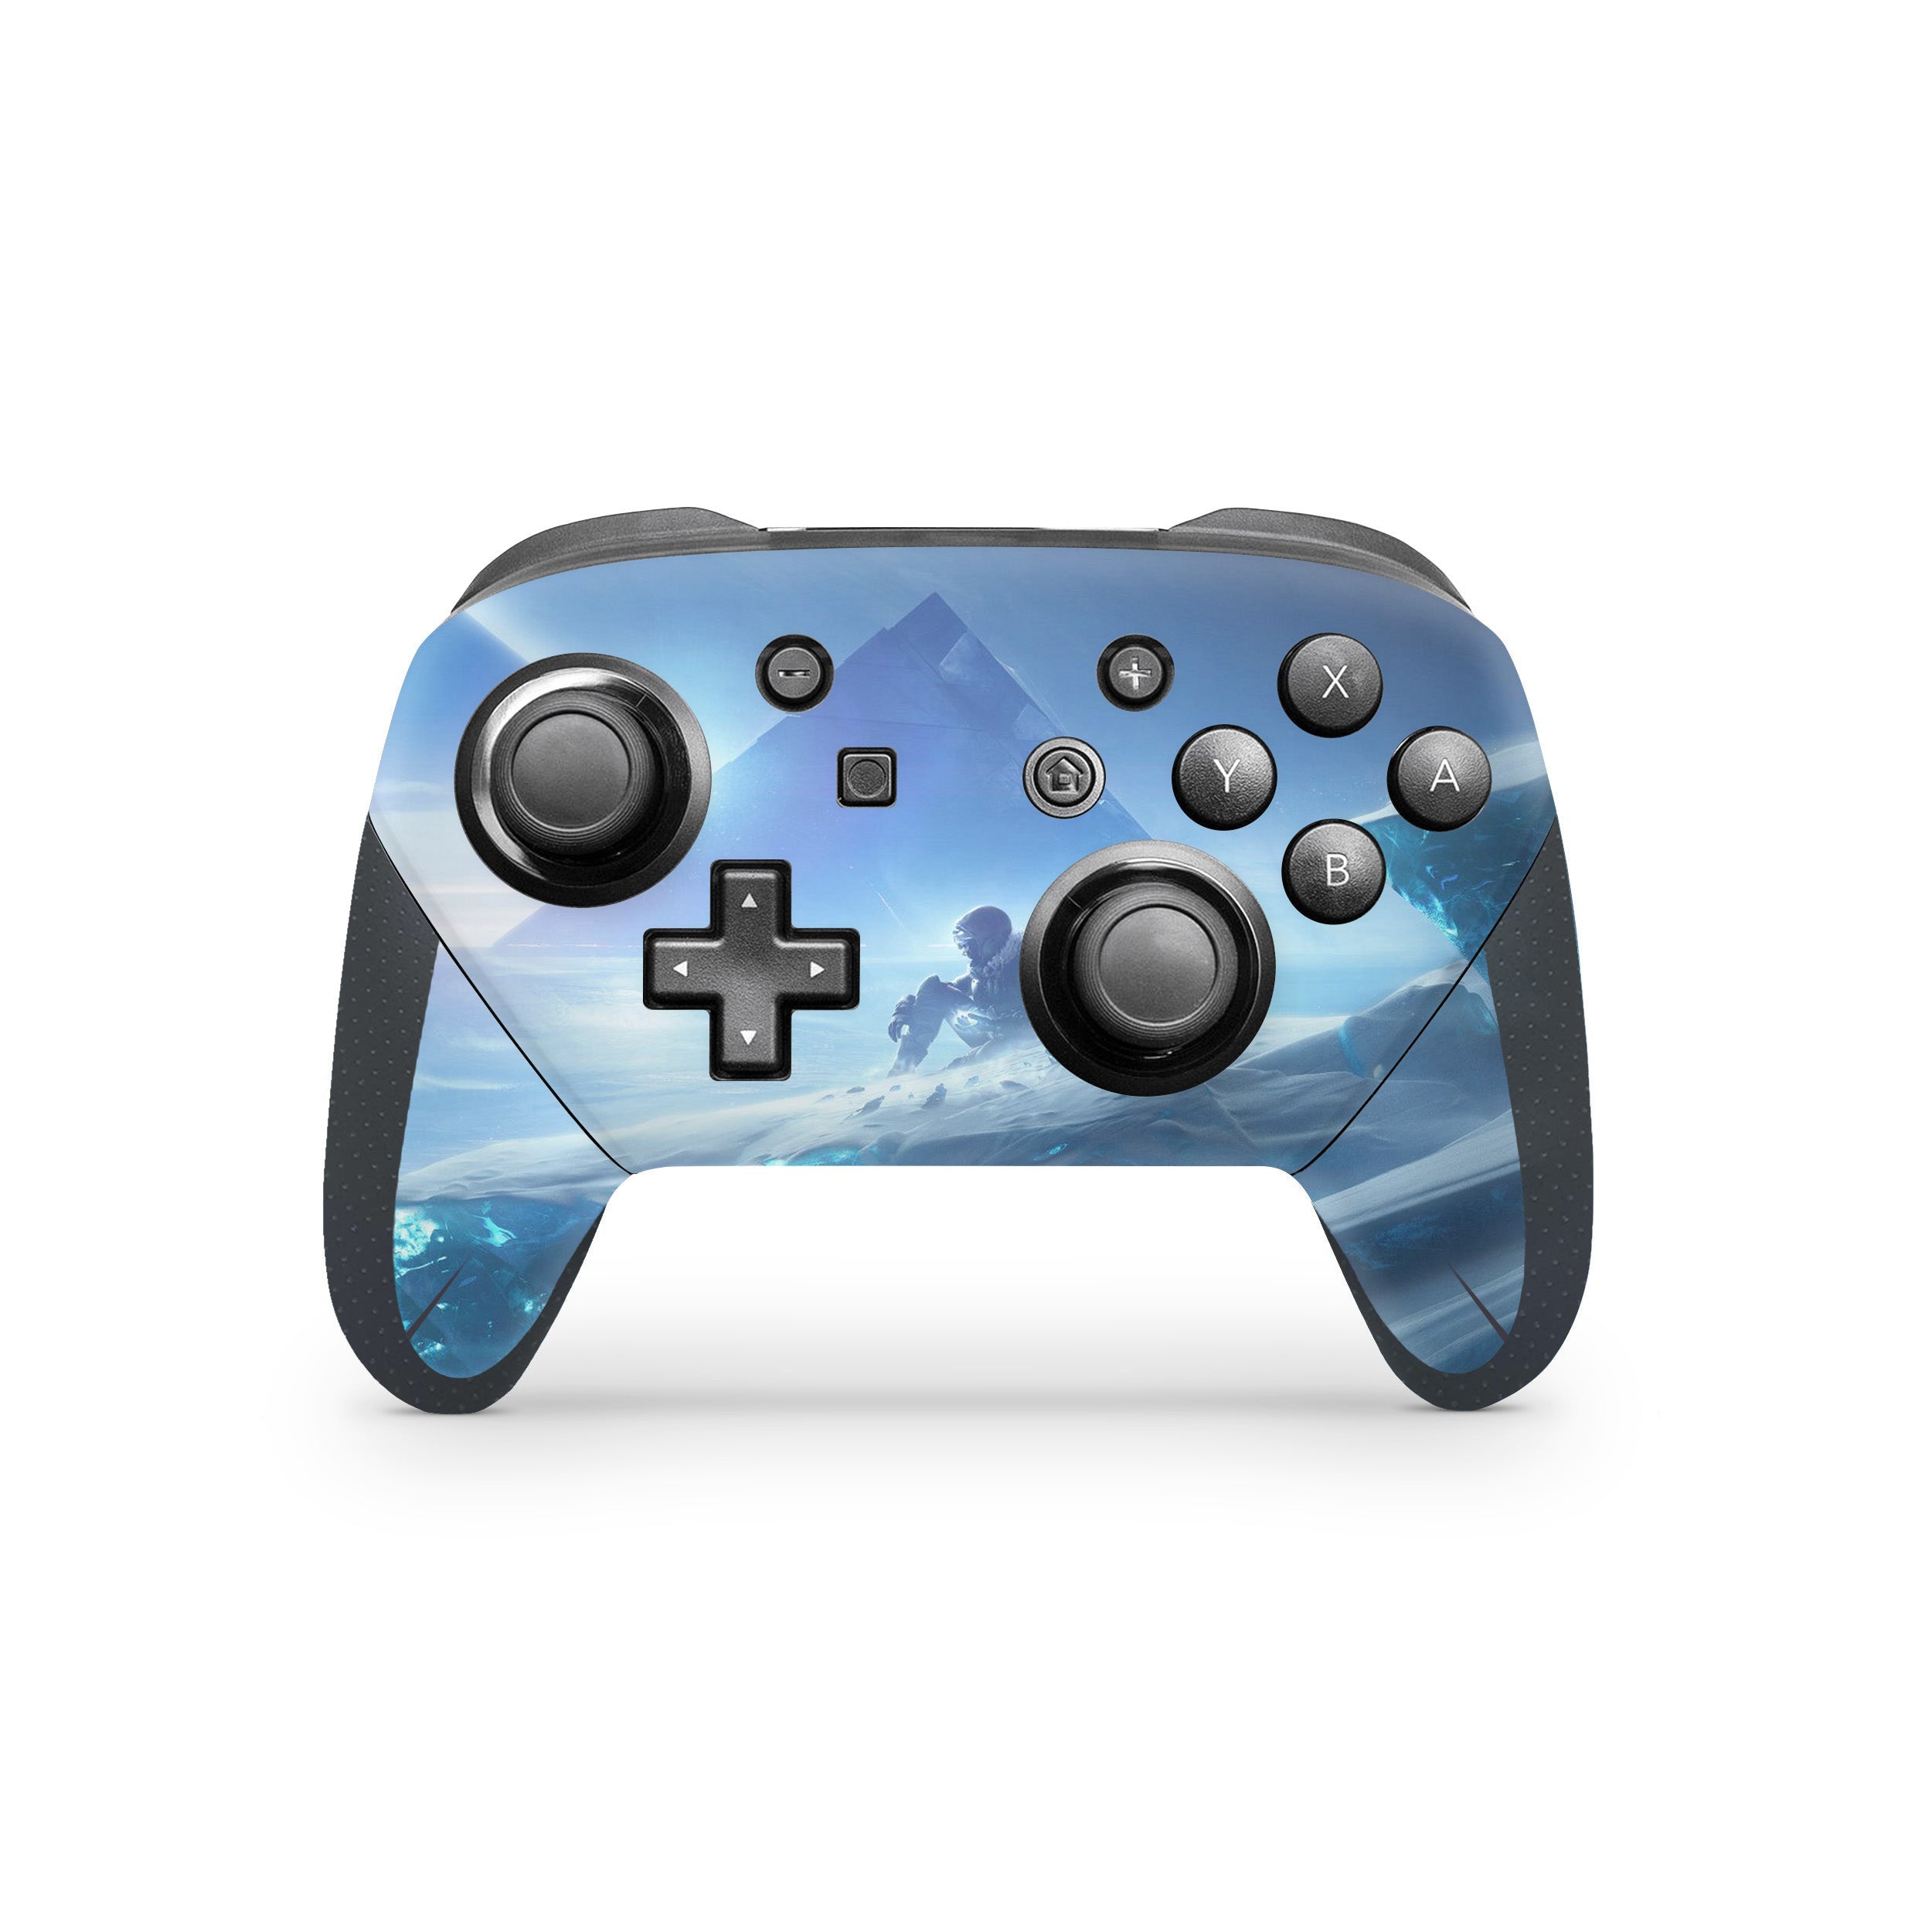 A video game skin featuring a Destiny 2 design for the Switch Pro Controller.